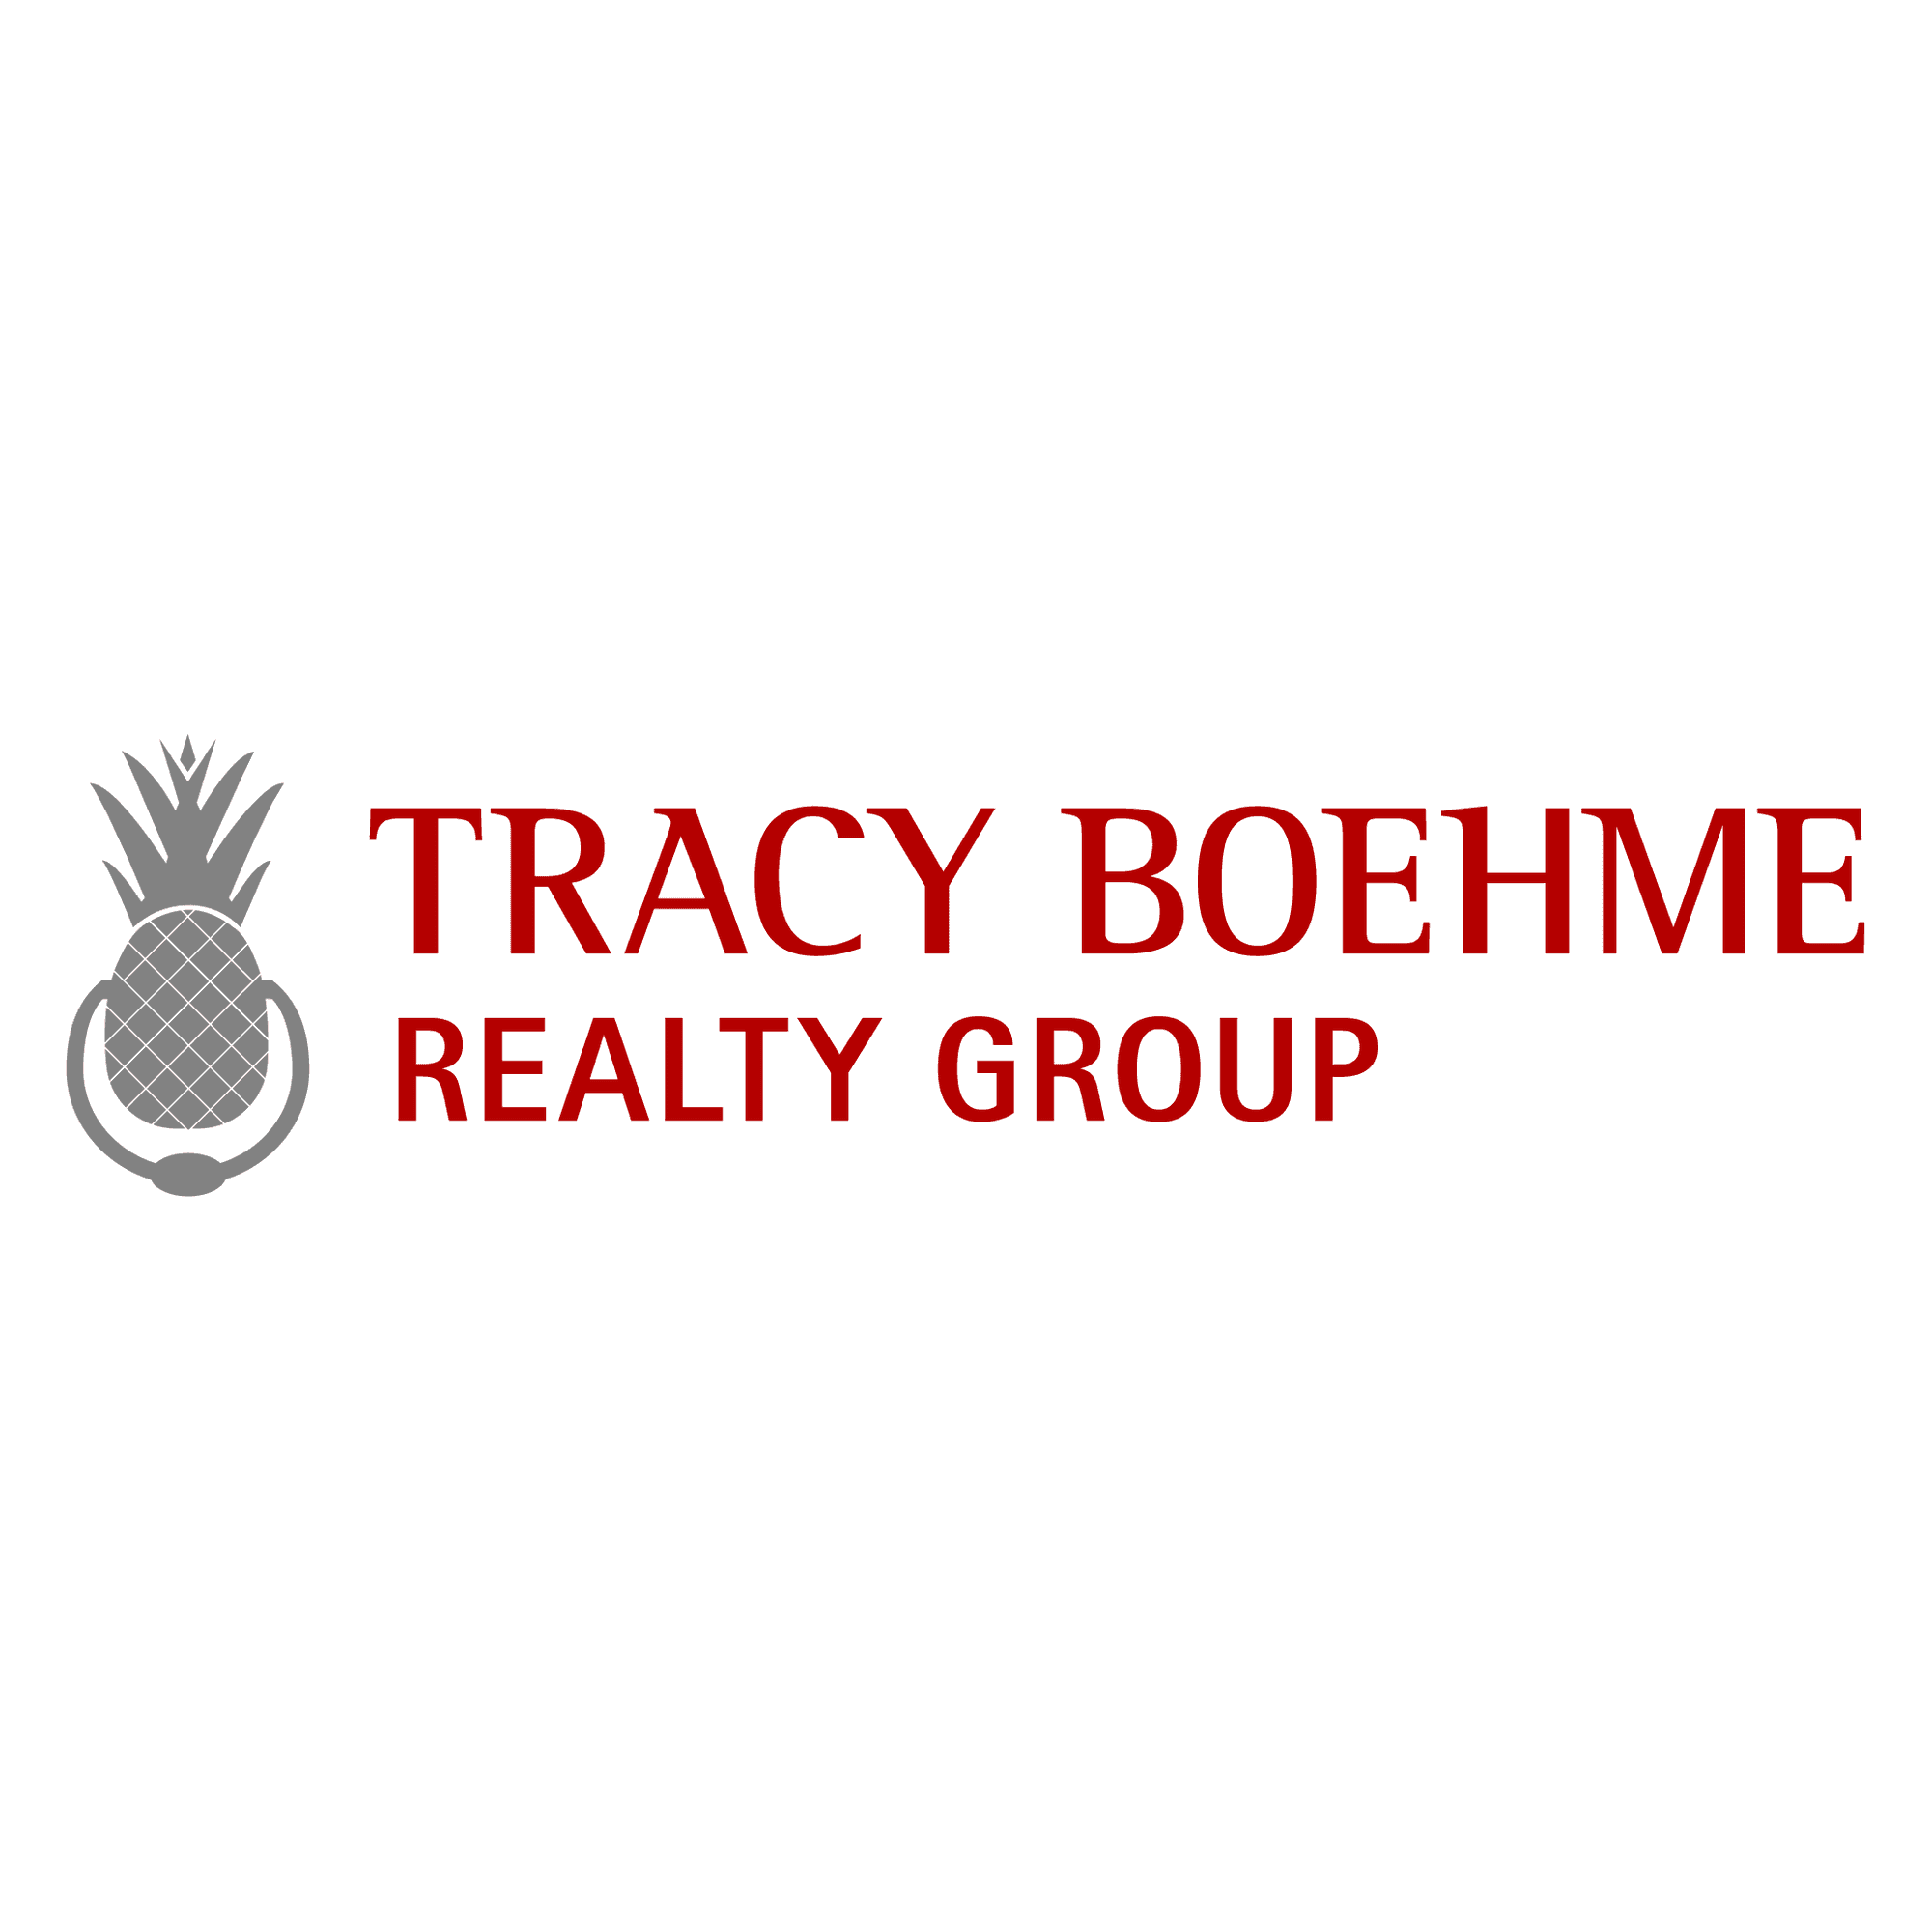 <p>Tracy Boehme </p><p>Realty Group</p> logo